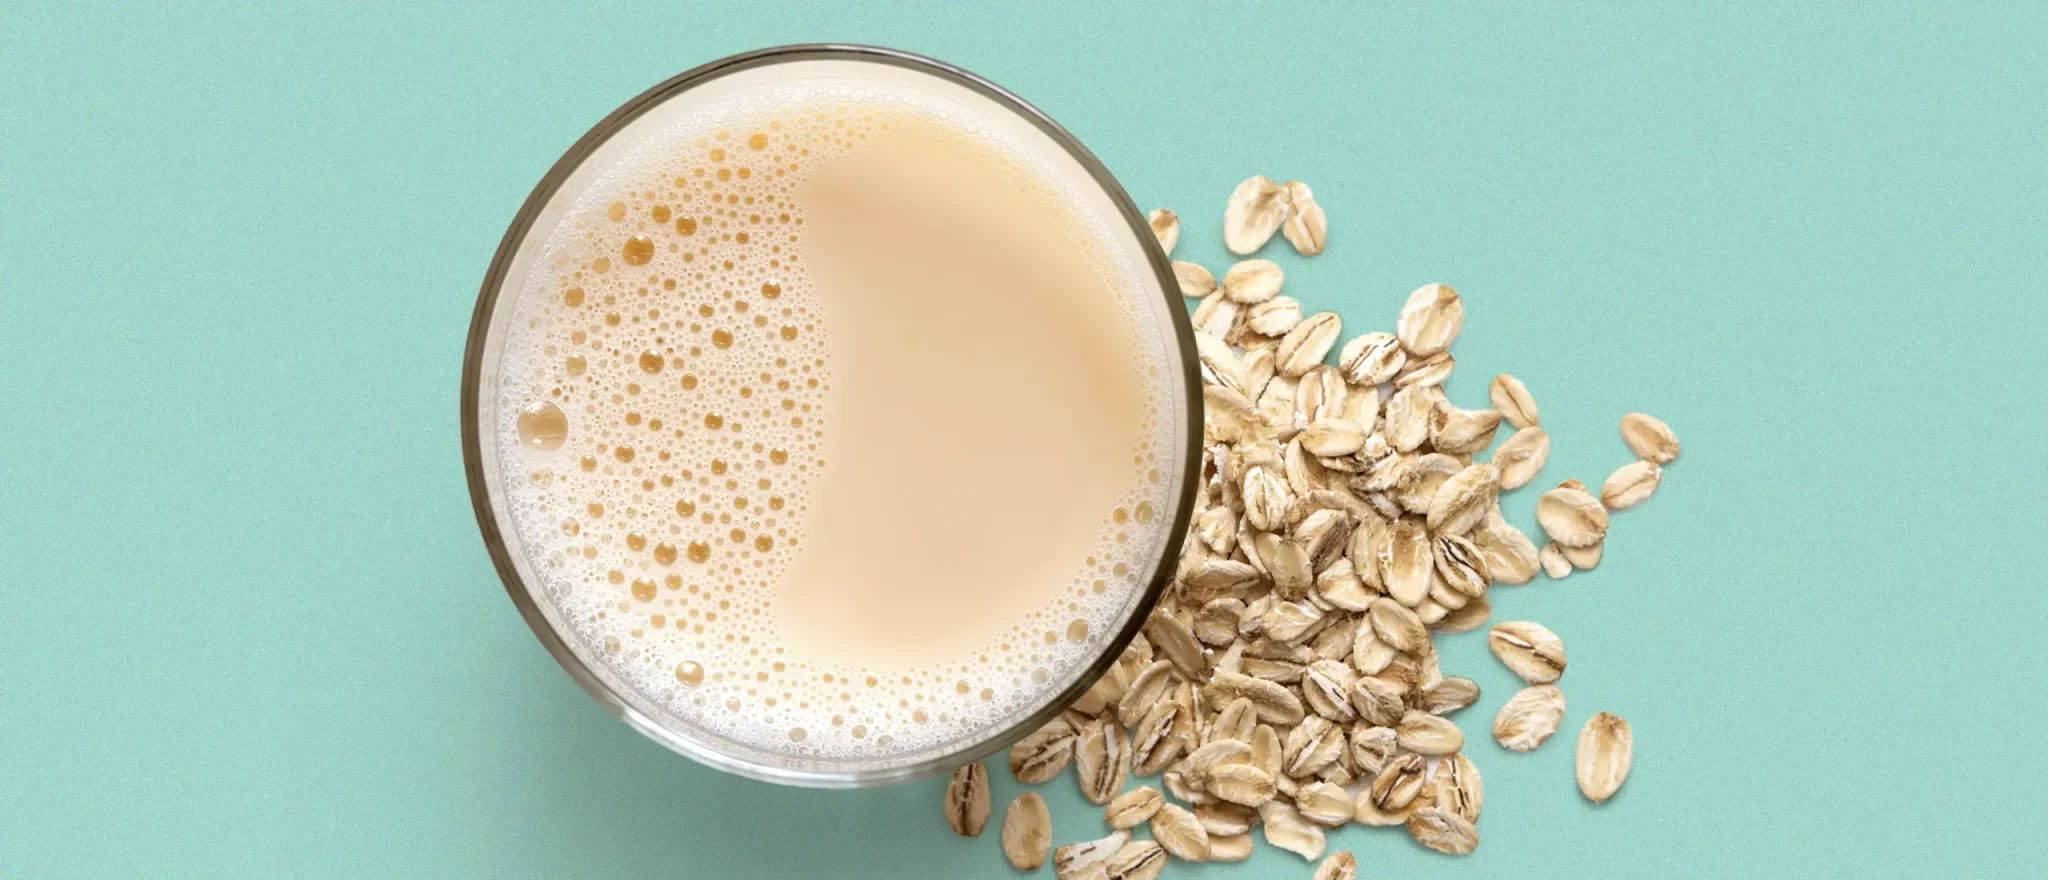 The 5 Healthiest Oat Milk Brands, According to a Registered Dietitian